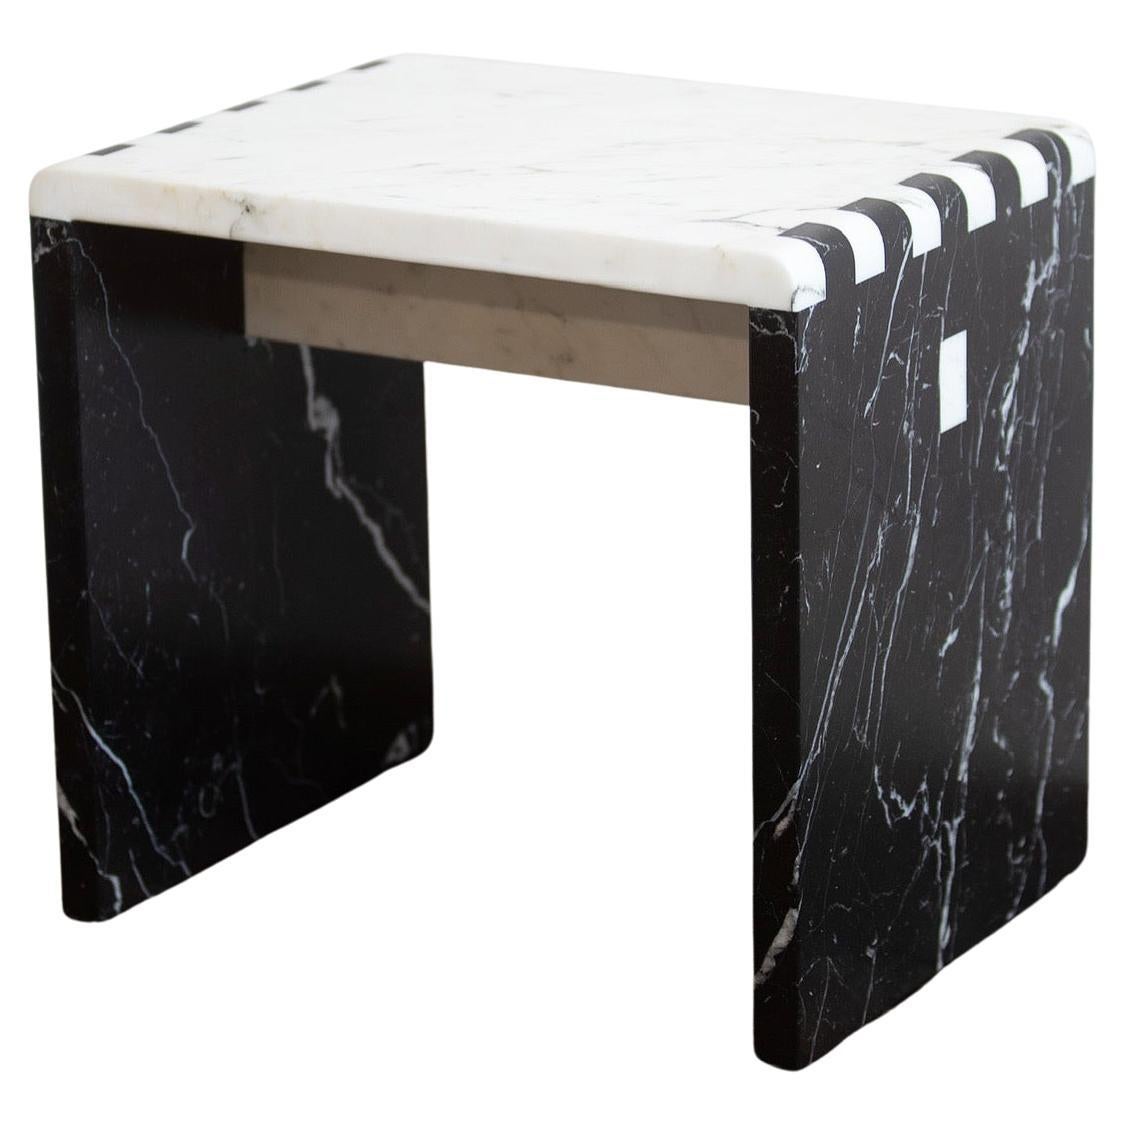 Inspired by traditional Japanese wood joinery, this minimalist stool/side table is a material study of stone. Shown in Calacatta Gold & Nero Marquina Marble. Sure to make a statement for any environment.